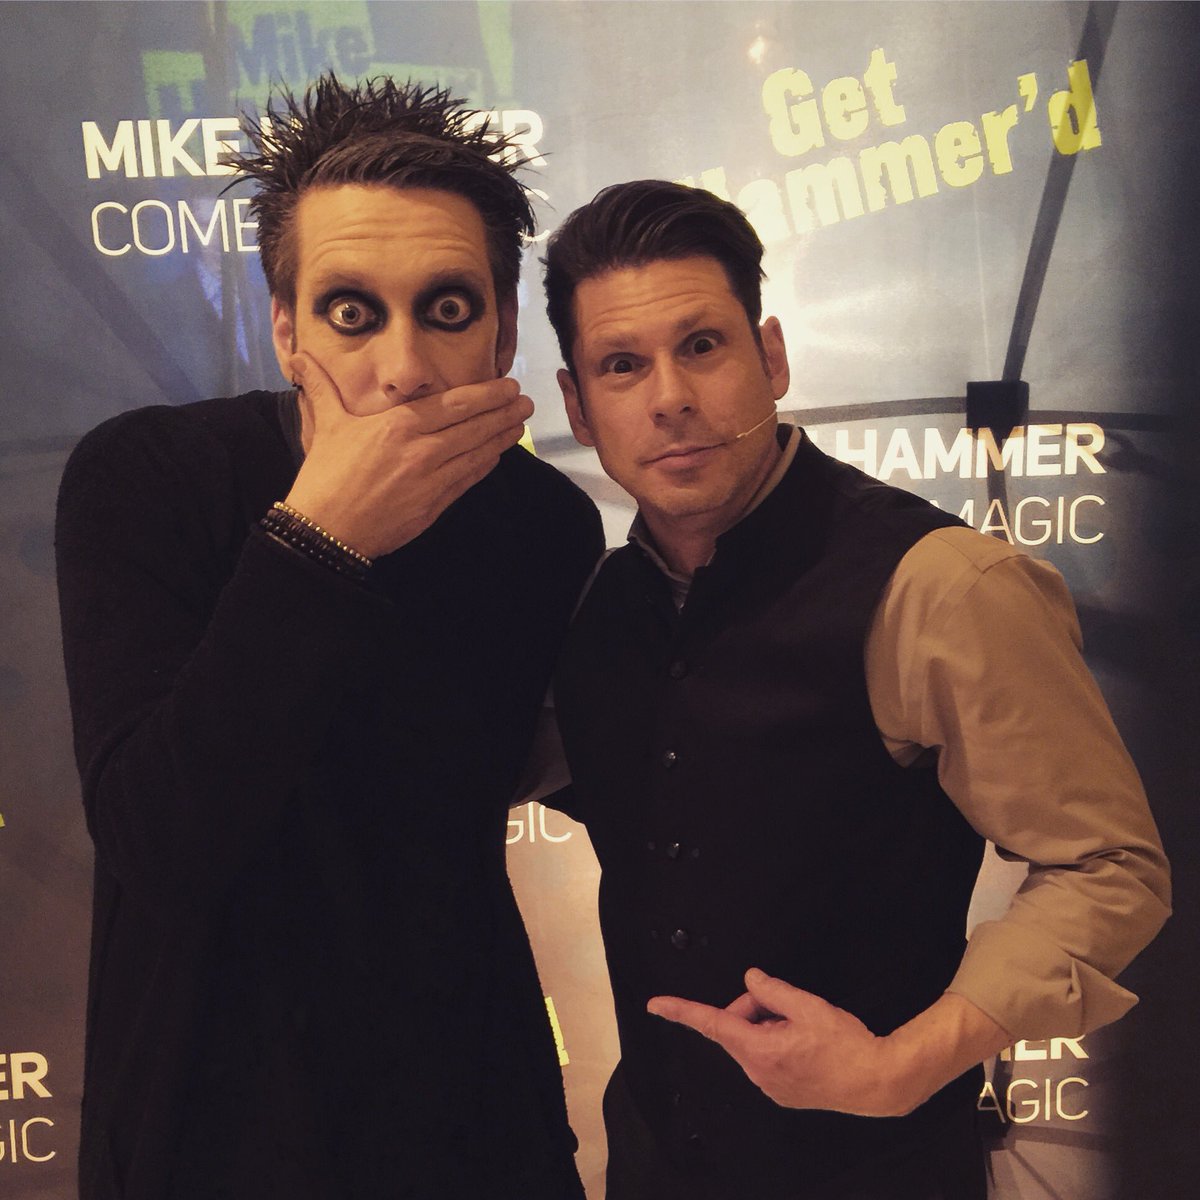 Glad to see @TapeFaceBoy at my show last night. @4QueensLV @FSELV @FREMONTSTREETLV bit.ly/2mzTGP6